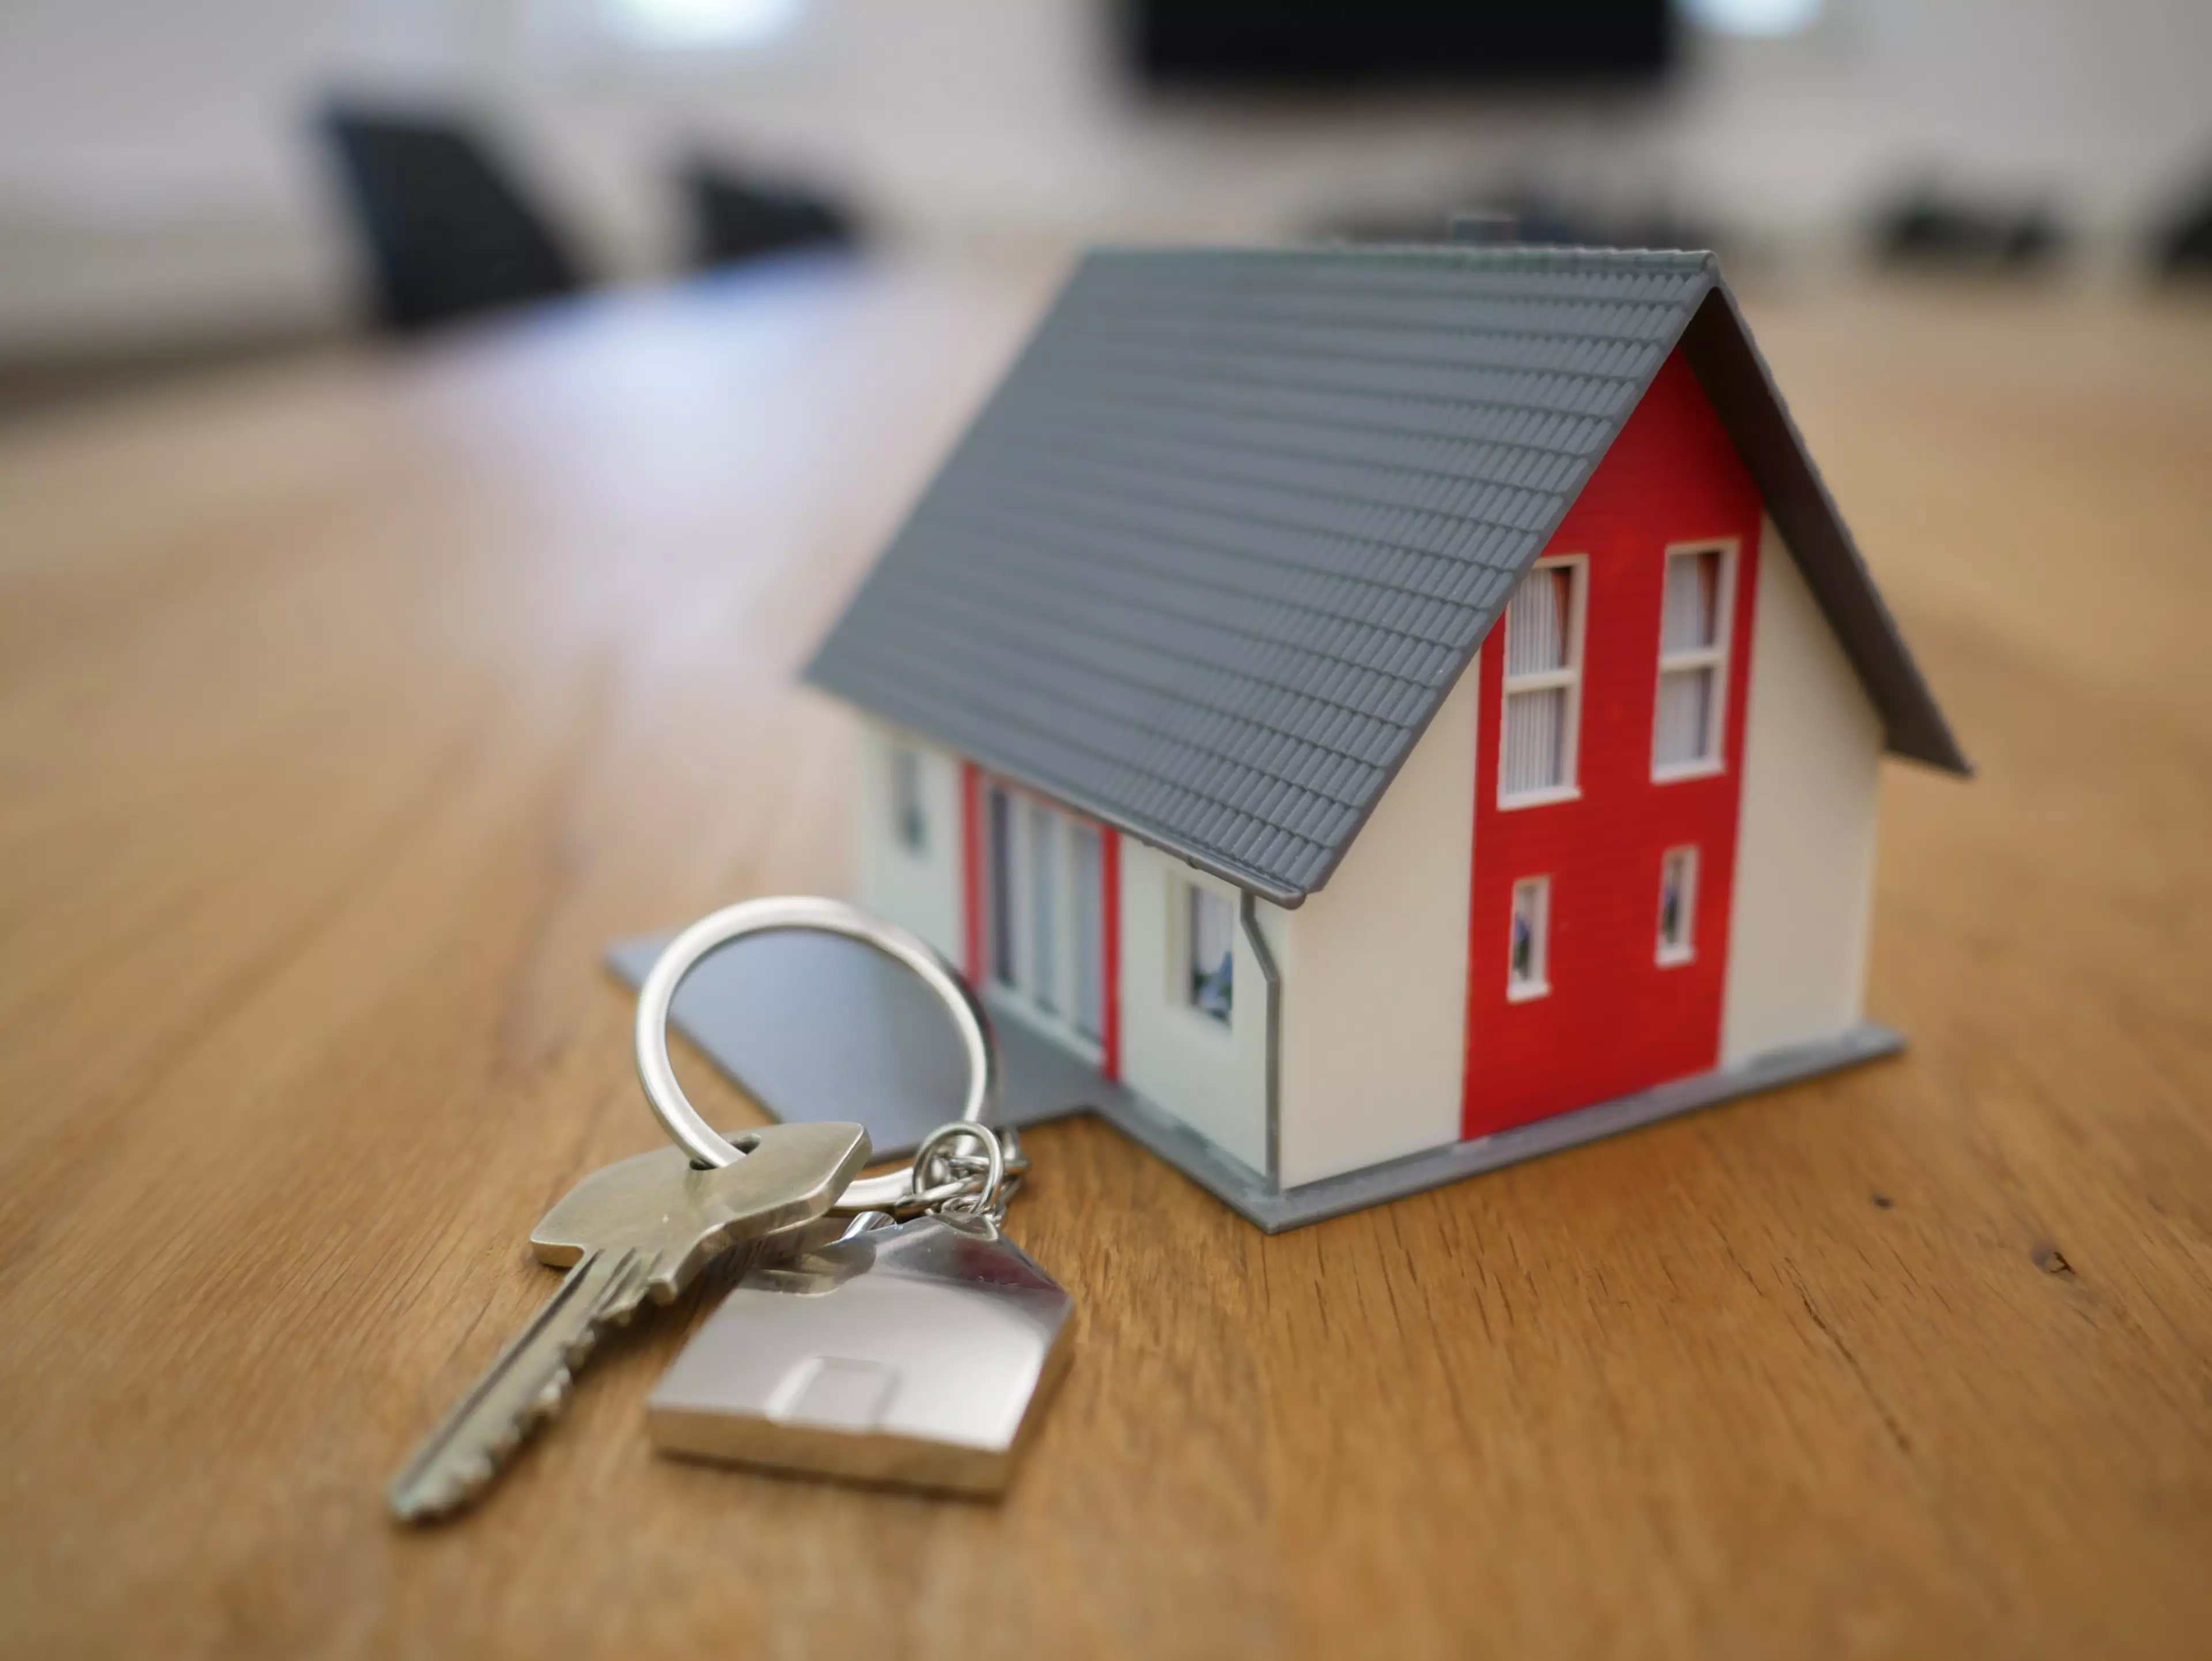 The scheme is set to begin in April and lenders will offer mortgages fixed for five years (